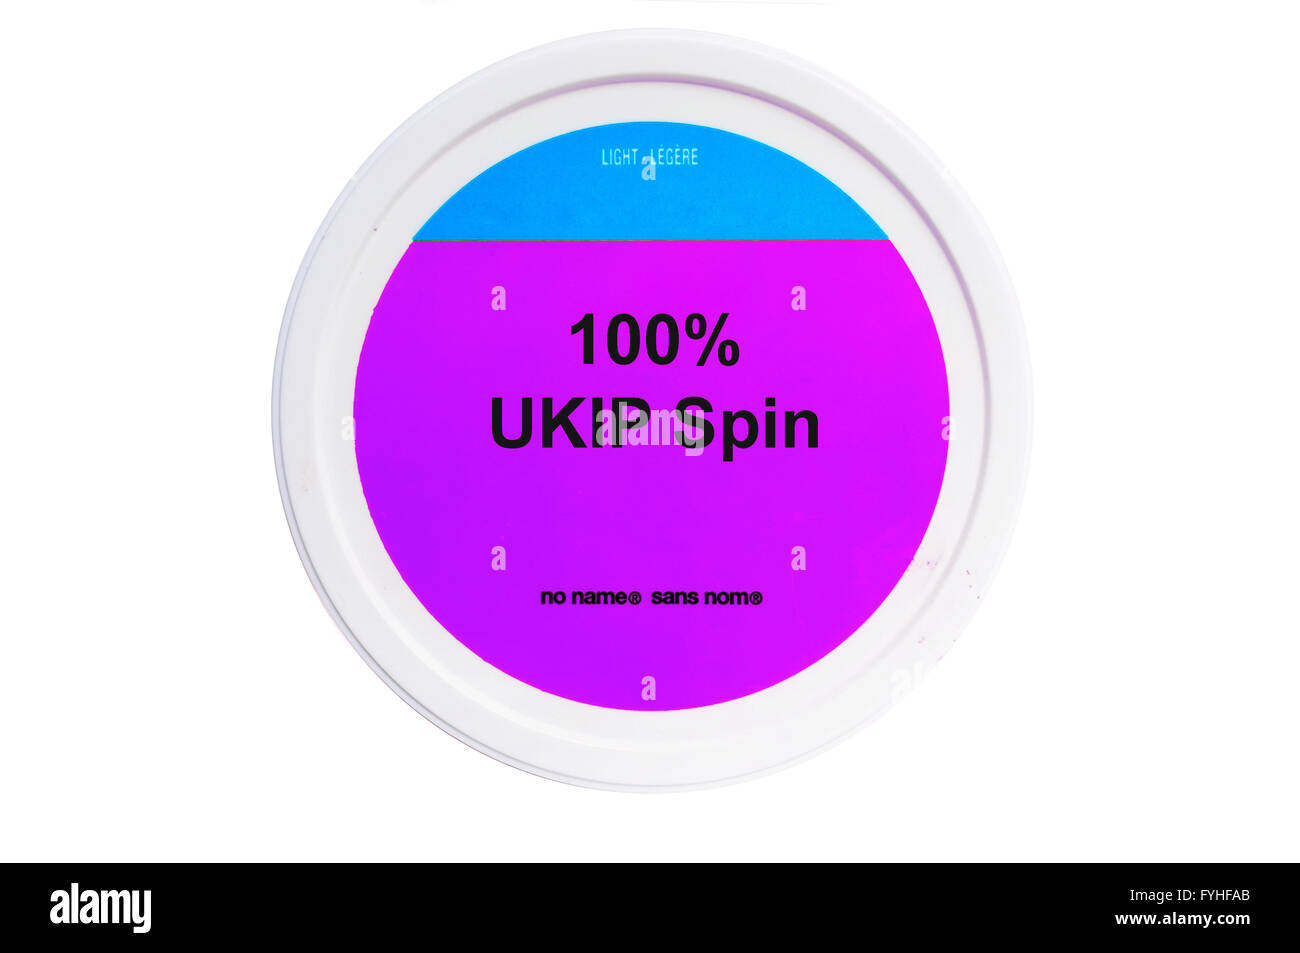 A tub with 100% UKIP Spin written on the label photographed against a white background. Stock Photo